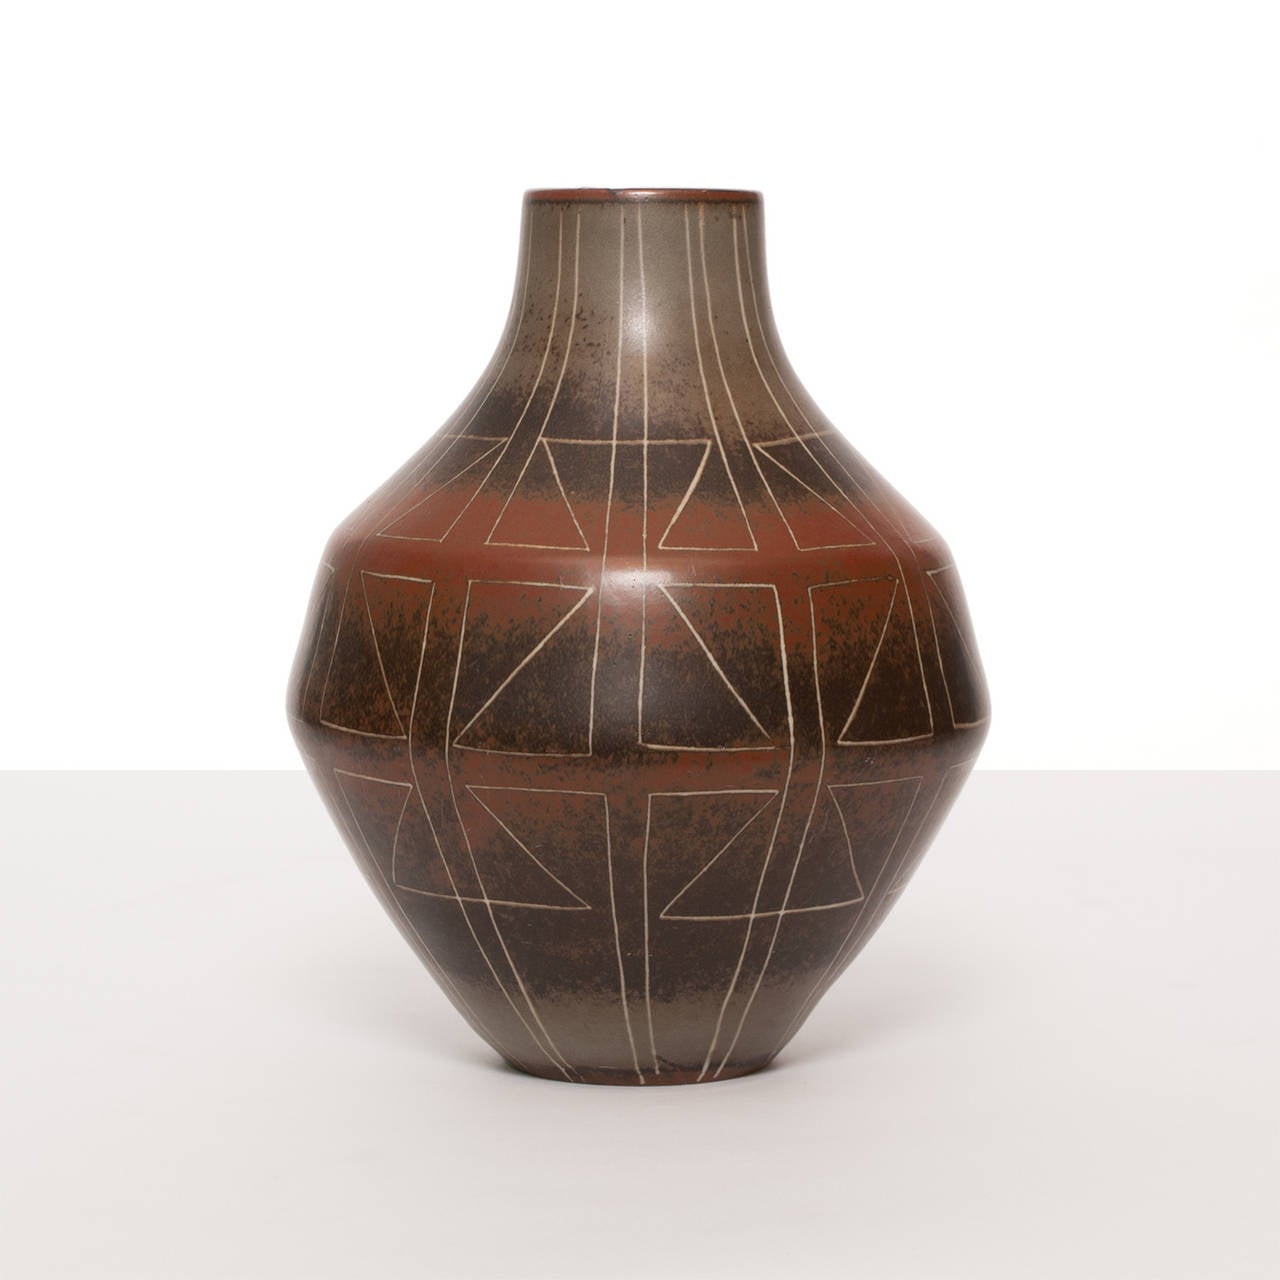 Large Swedish Mid-Century unique artist studio vase by Einar Lynge-Ahlberg for Rörstrand 1954-1957. The vase features a combination of organic and geometric forms and enhanced with subtle glazing. Artist Einar Lynge-Ahlberg was a founding member of